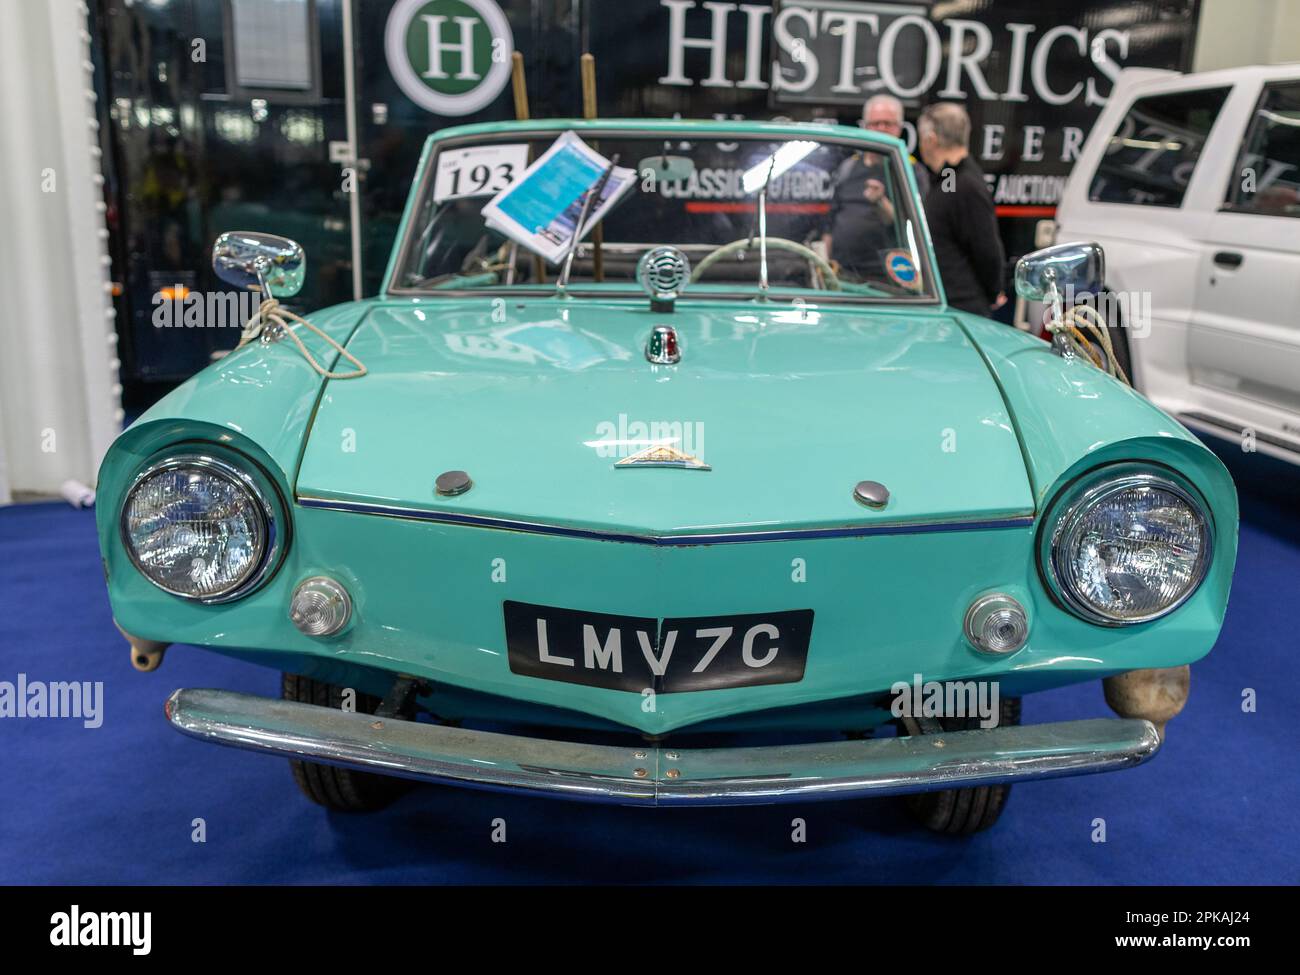 A Classic Amphicar from 1967 Classic Car Show London UK Stock Photo